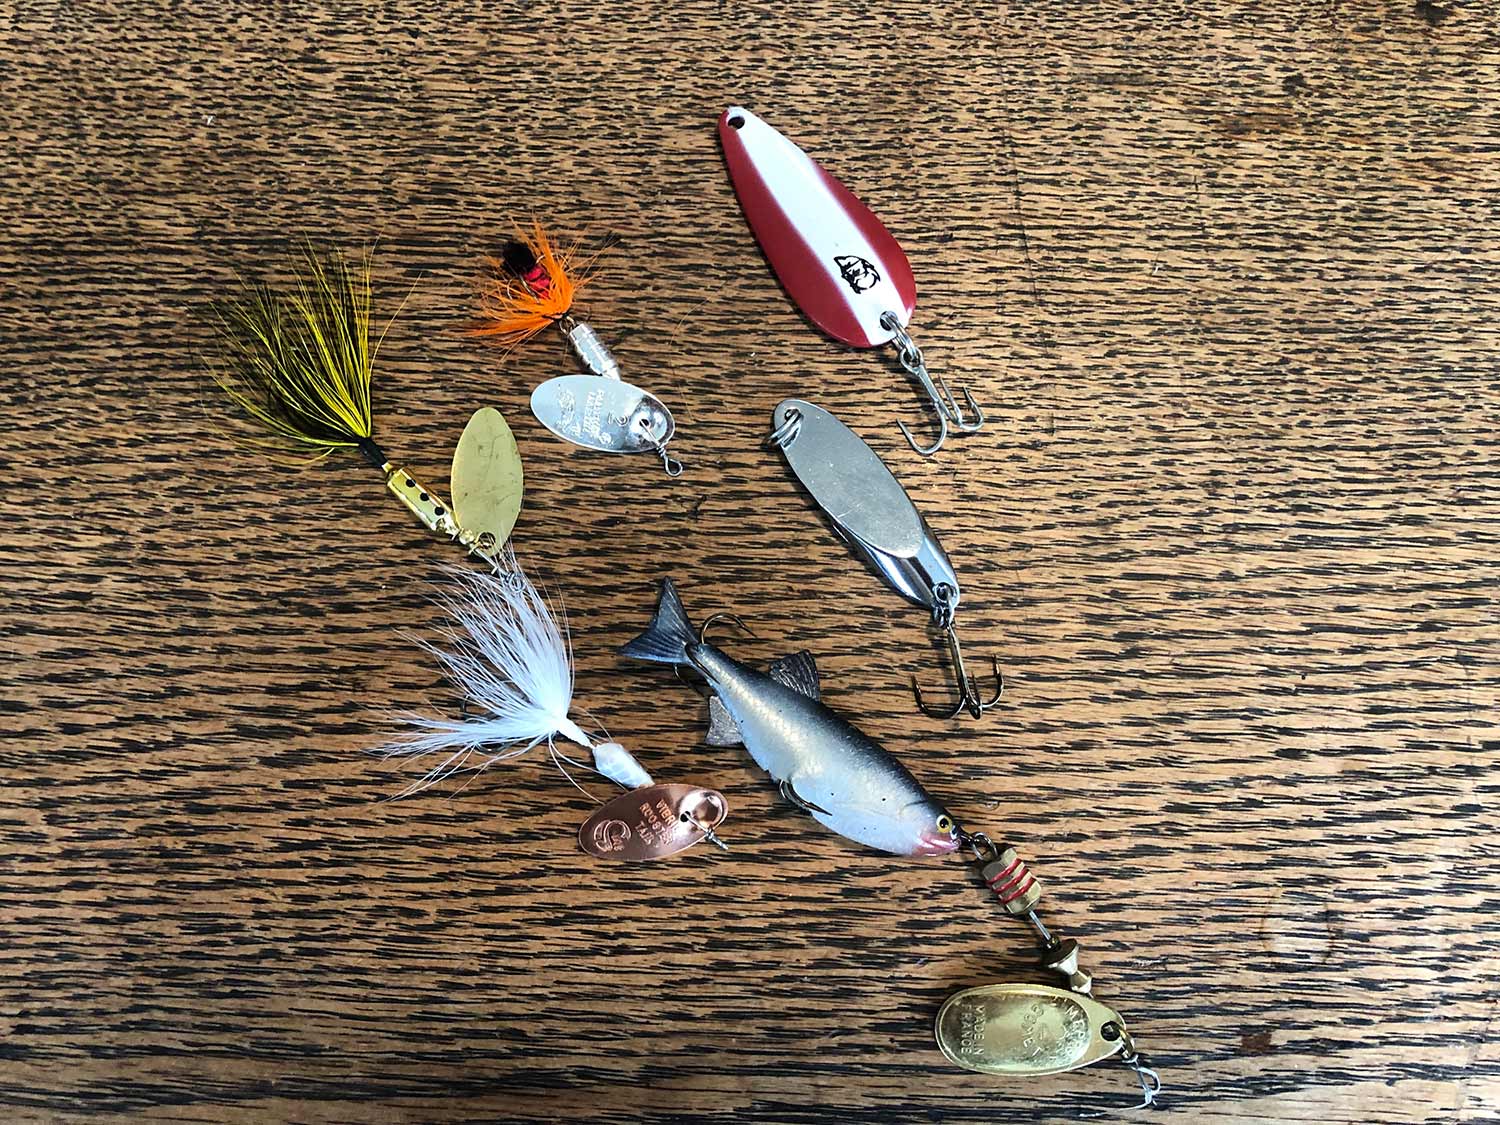 An assortment of trout spinners and spoons.